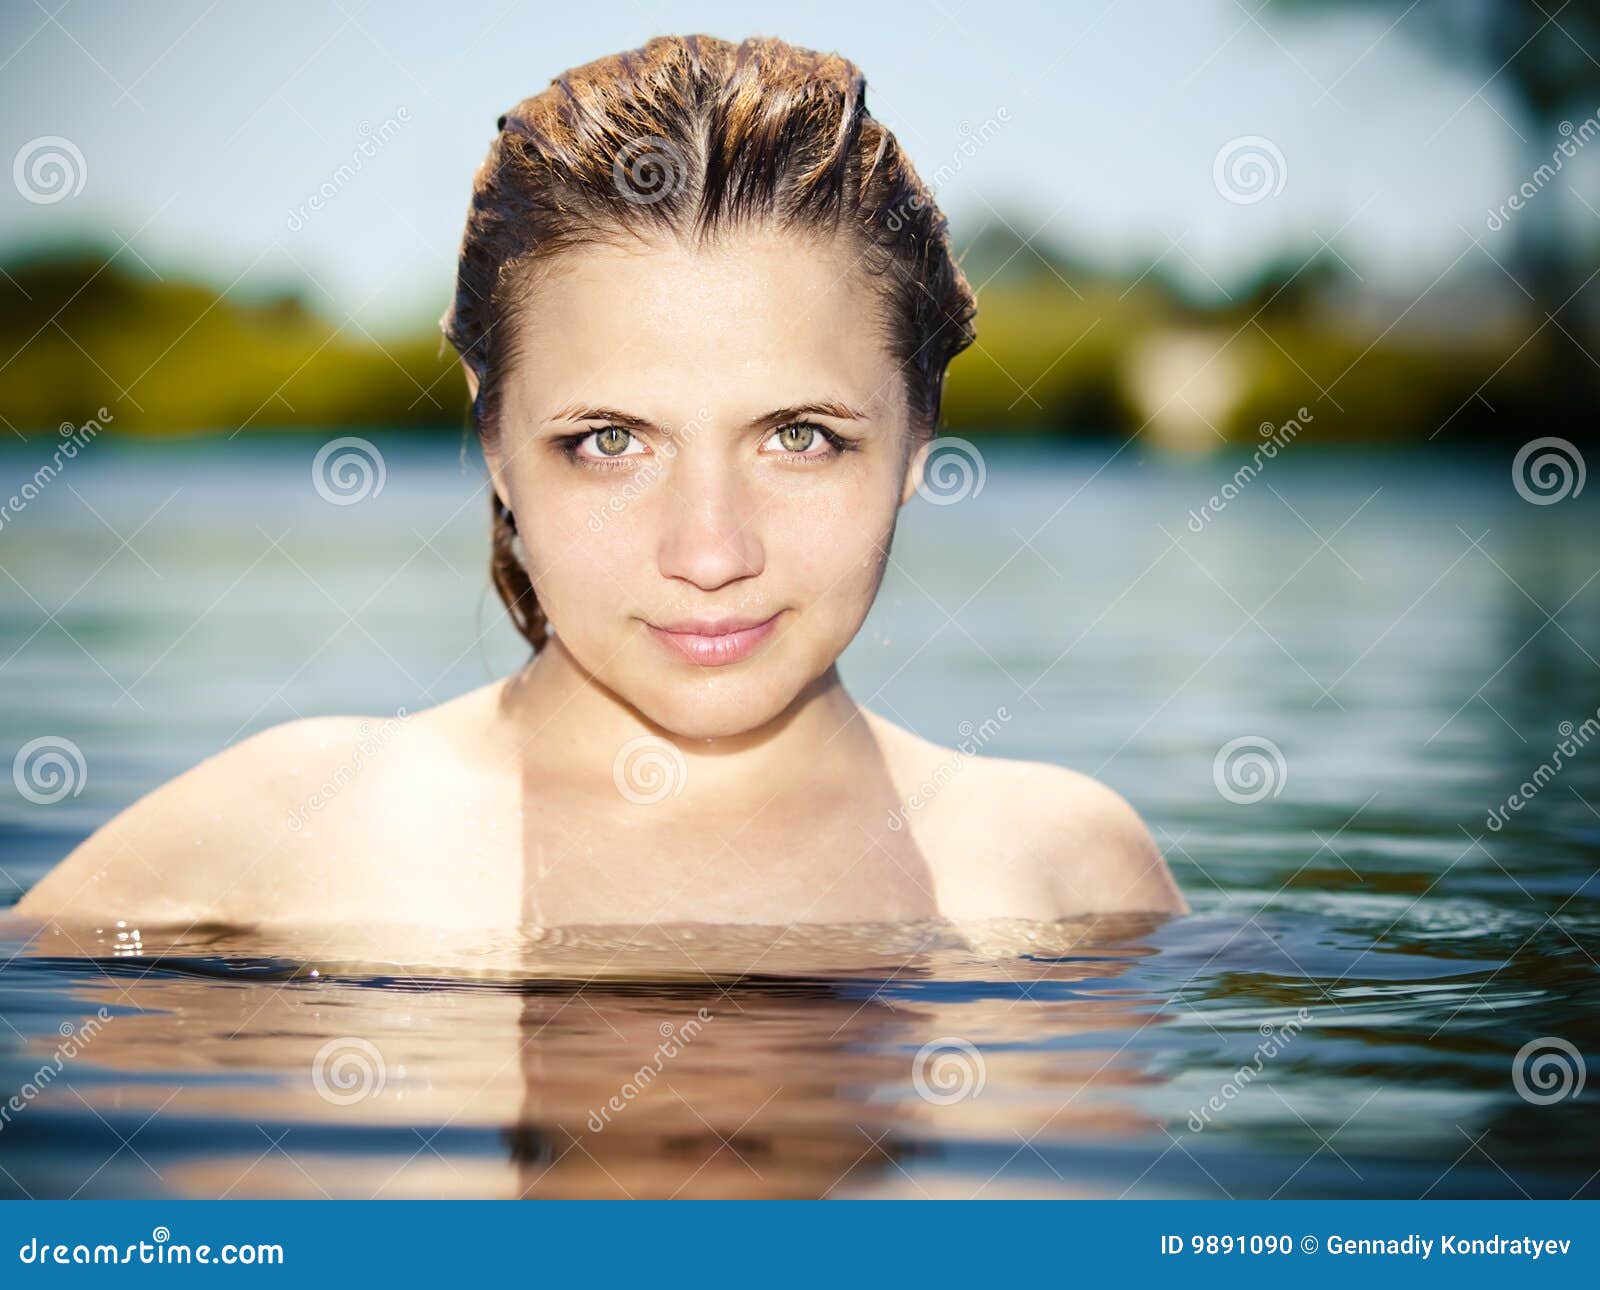  preteen little girls nude  Young Girl in the Water with Naked Shoulders Stock Photo ...